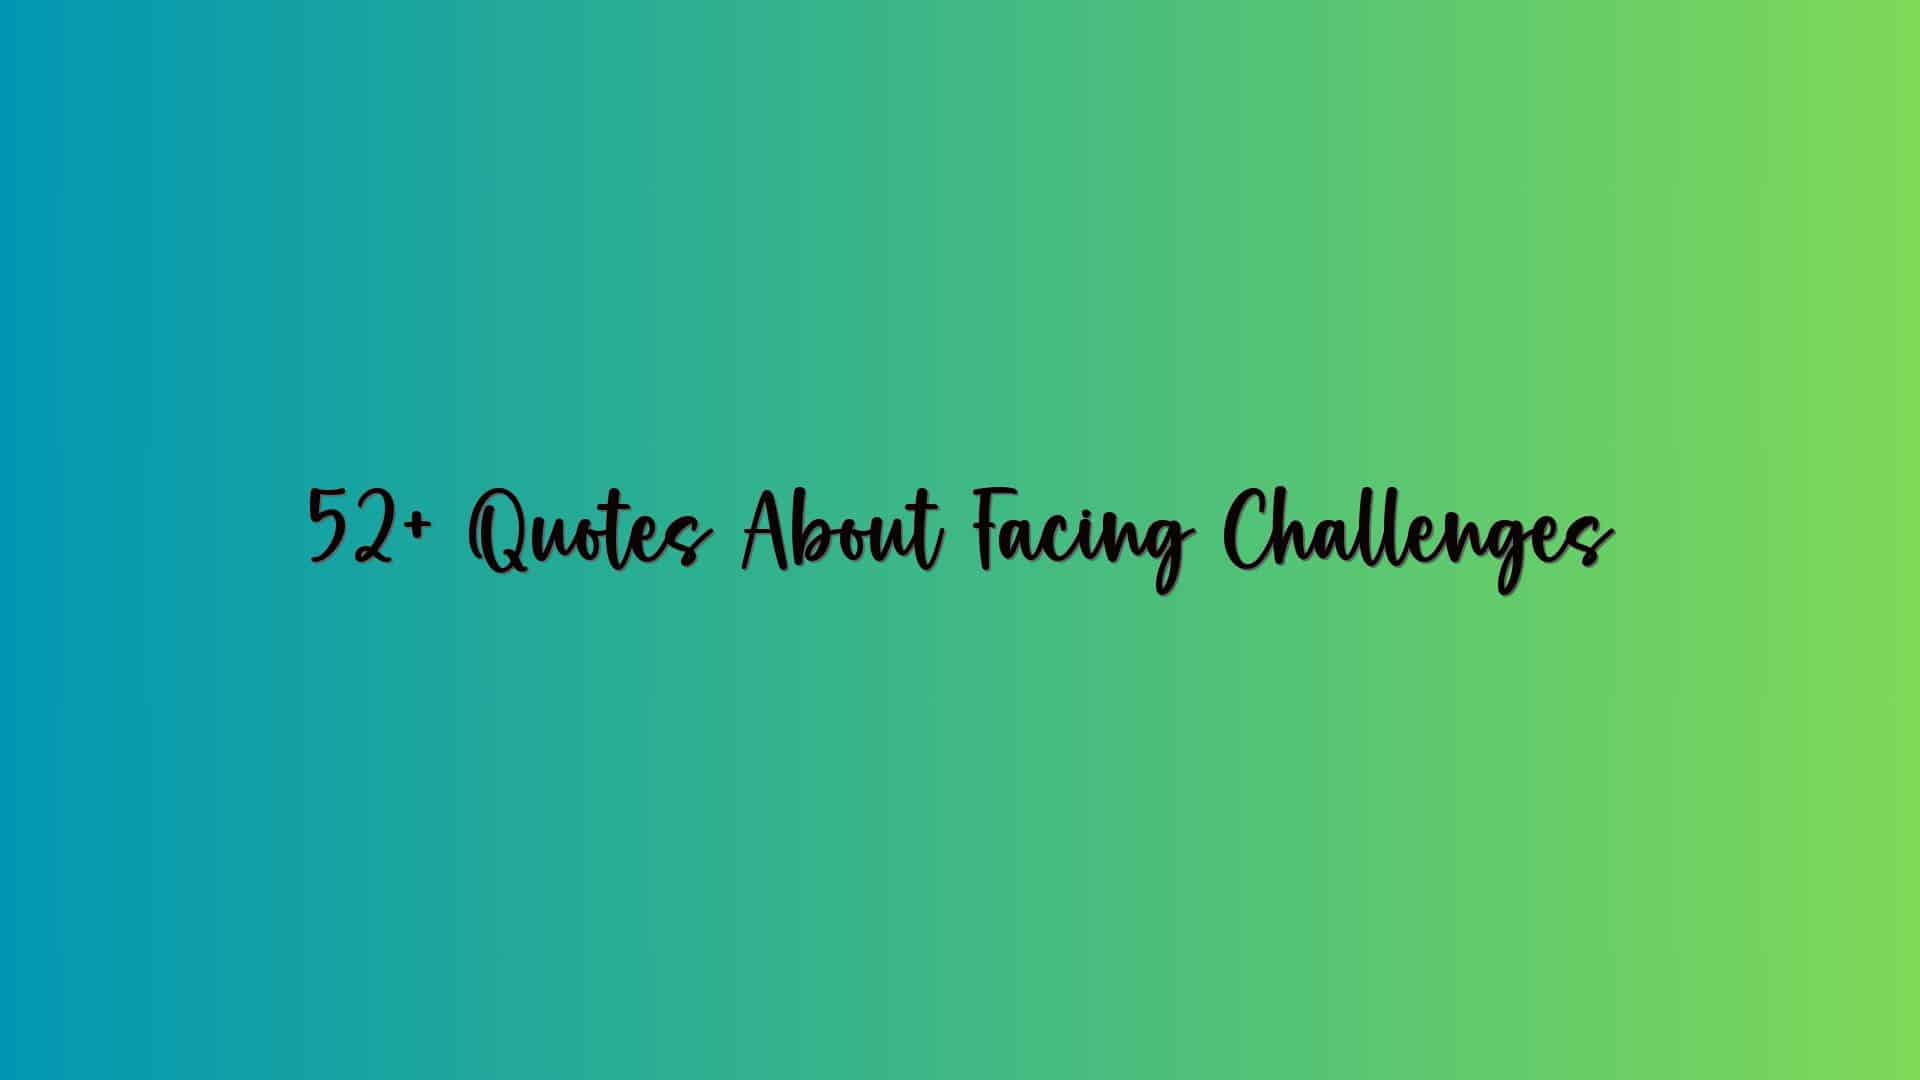 52+ Quotes About Facing Challenges